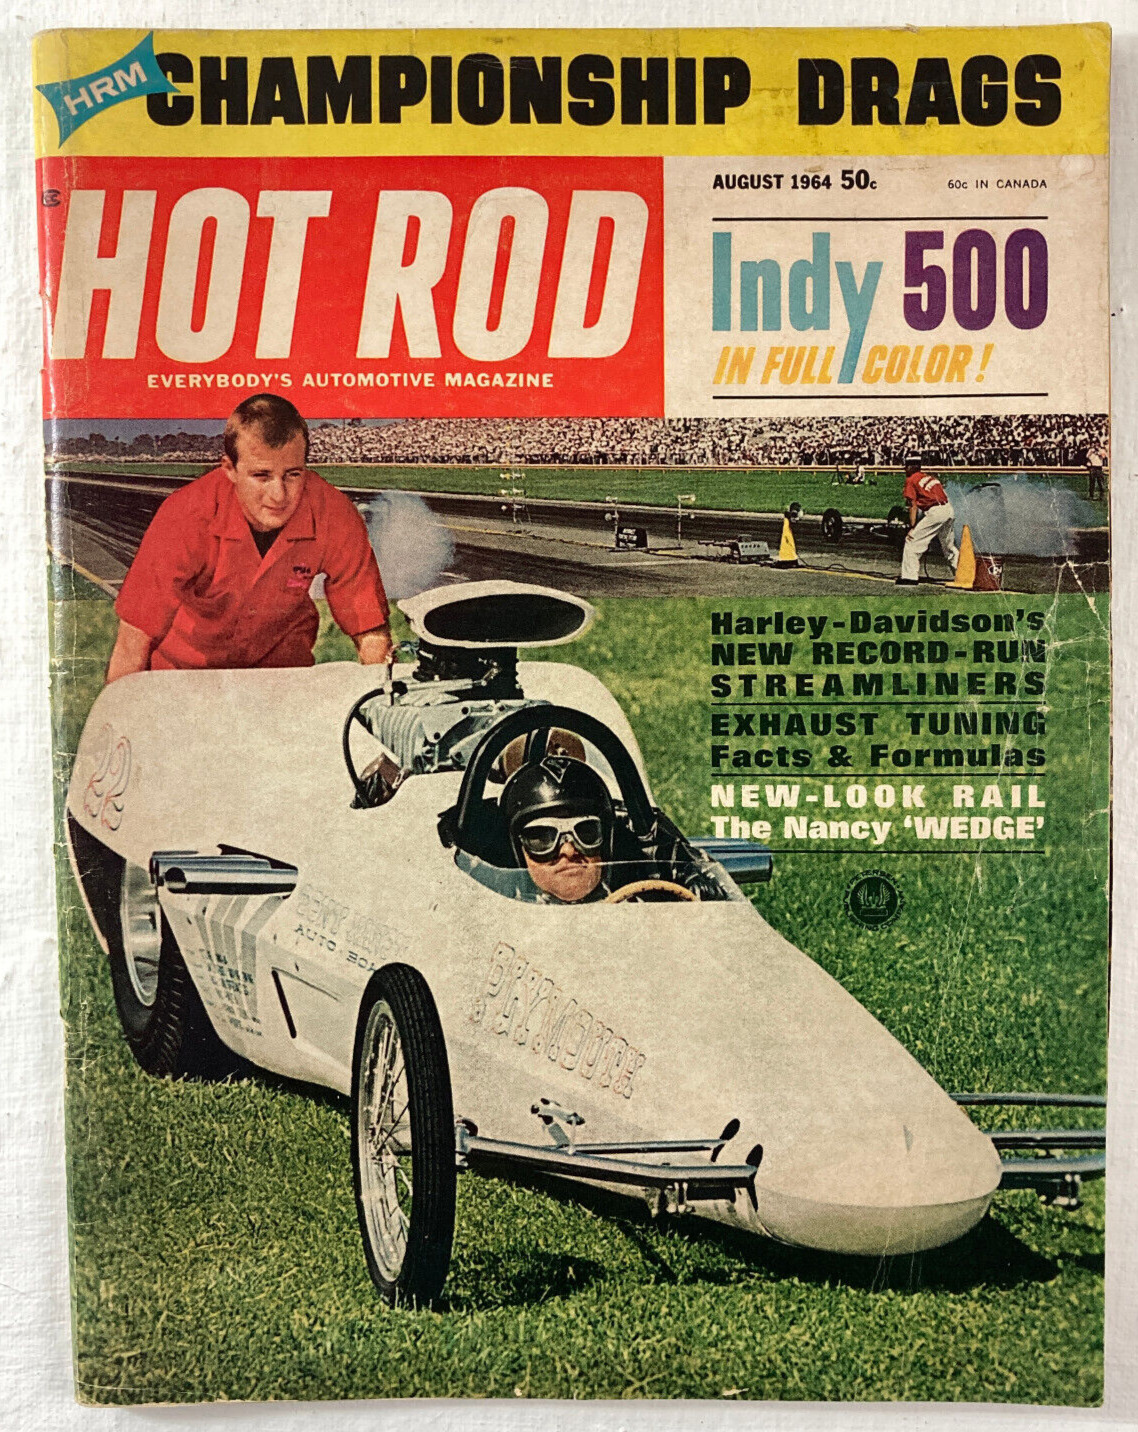 Vintage Hot Rod Magazine August 1964 Exhaust Tuning Champion Drags